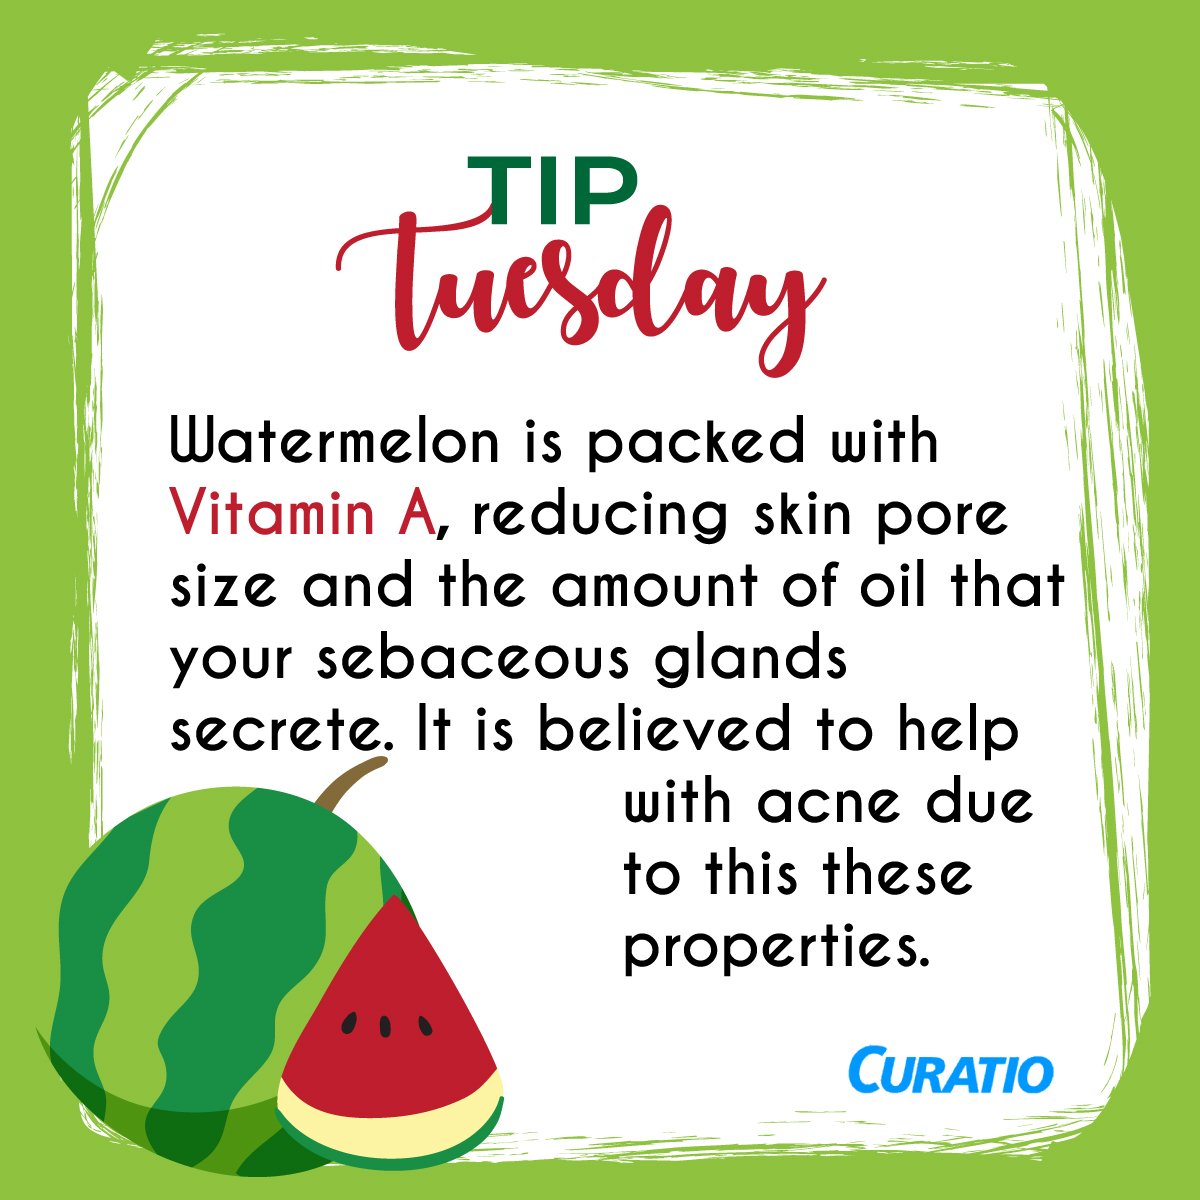 Did you know that your summer snack, watermelon originated probably in Kalahari desert in Africa?
#TipTuesday #Healthcare #Skincare #Benefitsofwatermelon